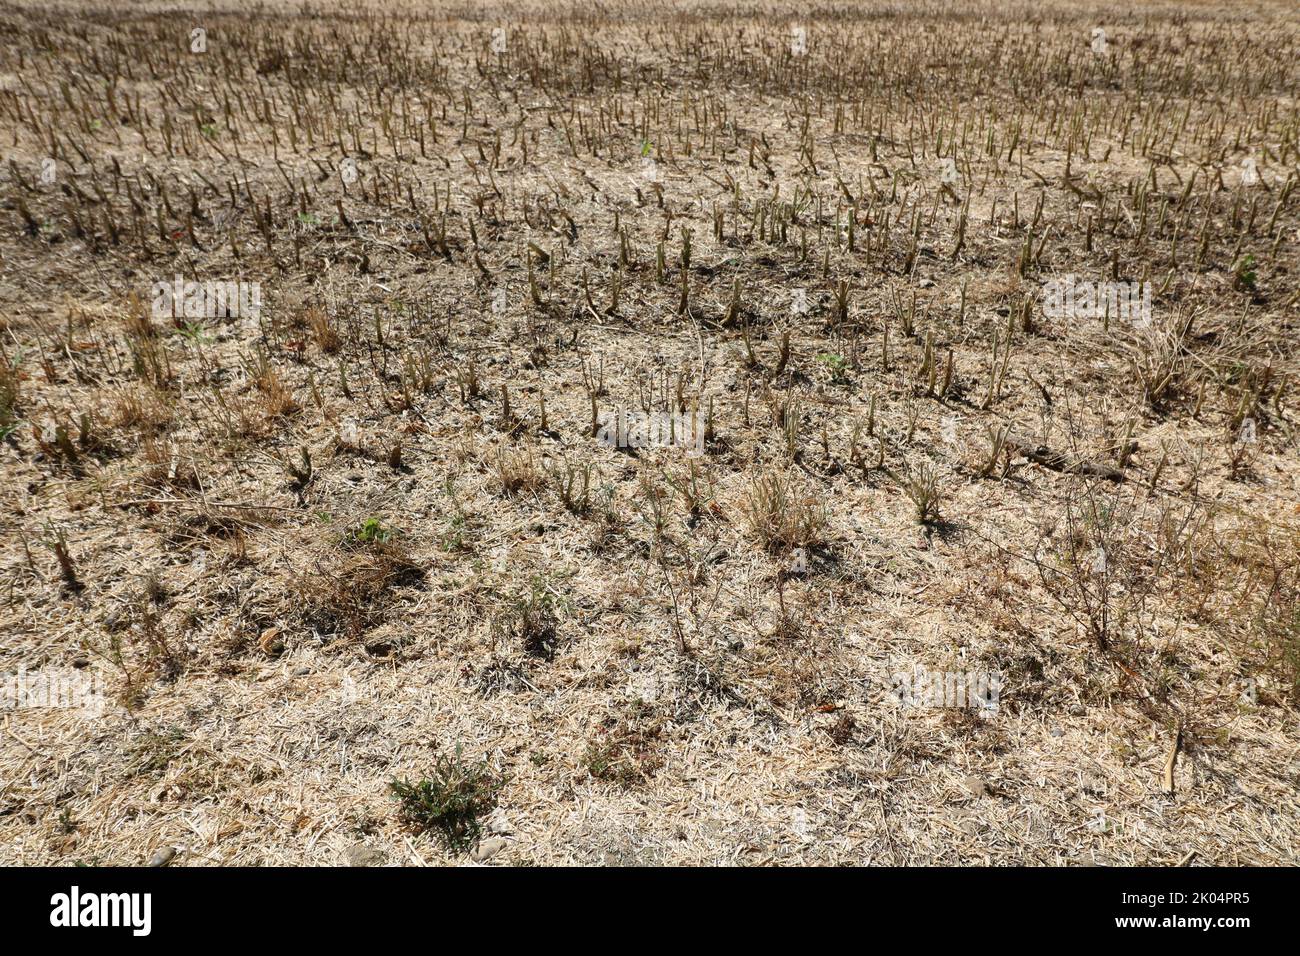 Full frame image of short cropped corn stubble after harvesting Stock Photo